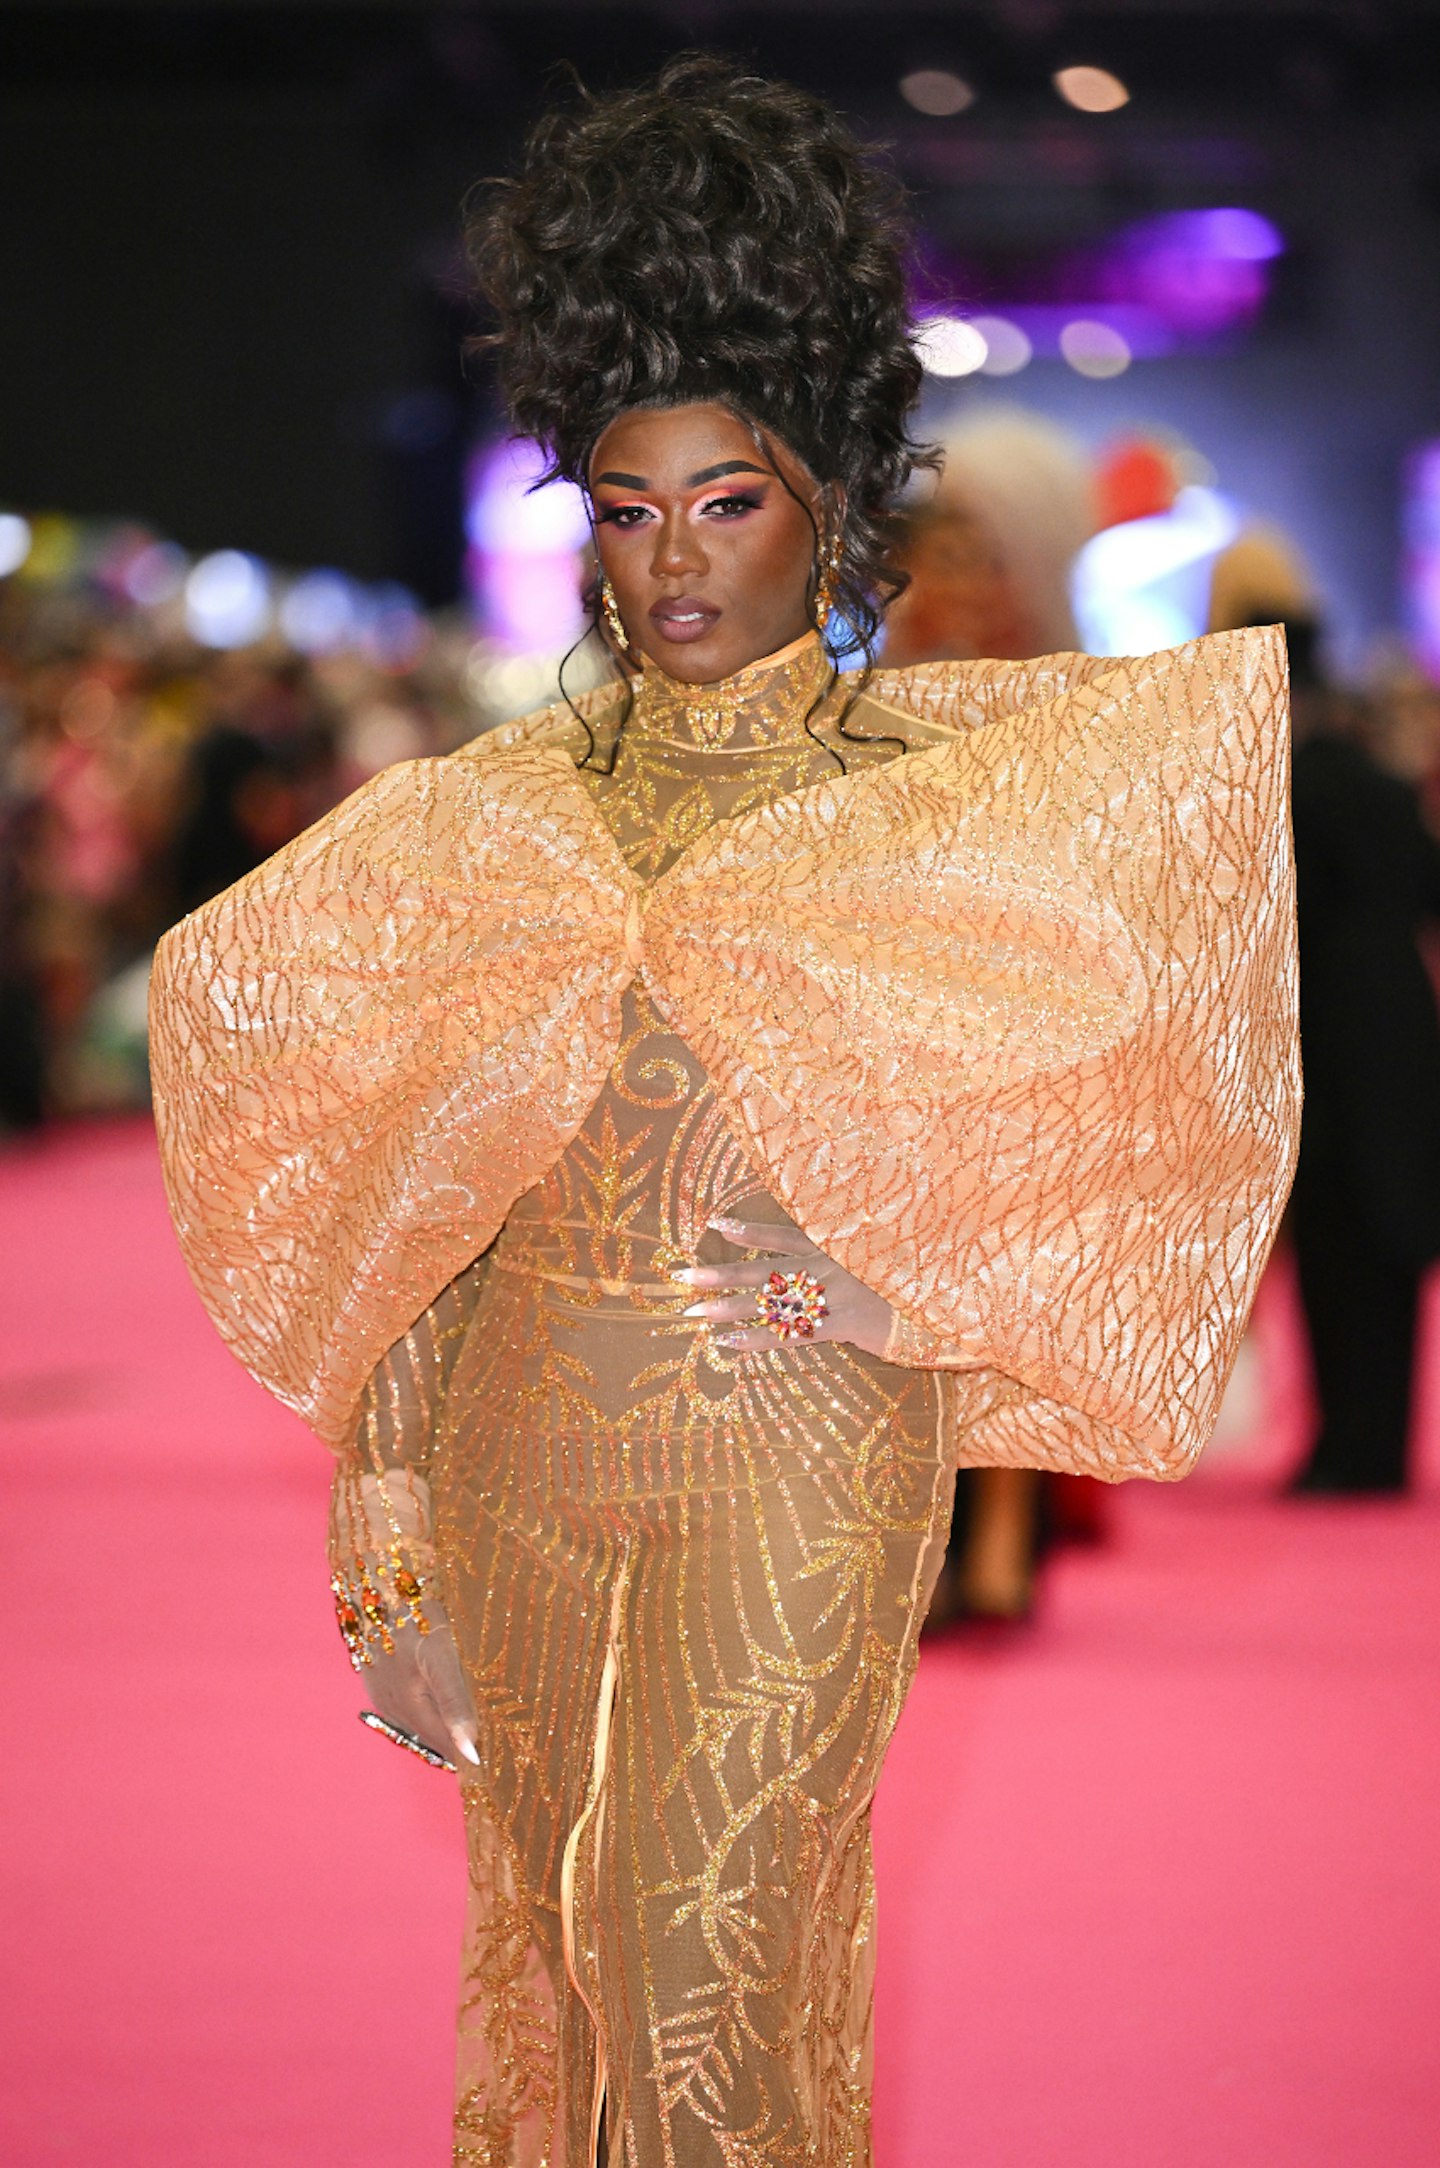 Vanity Milan poses on the Queens walk during the official opening of RuPaul’s DragCon UK